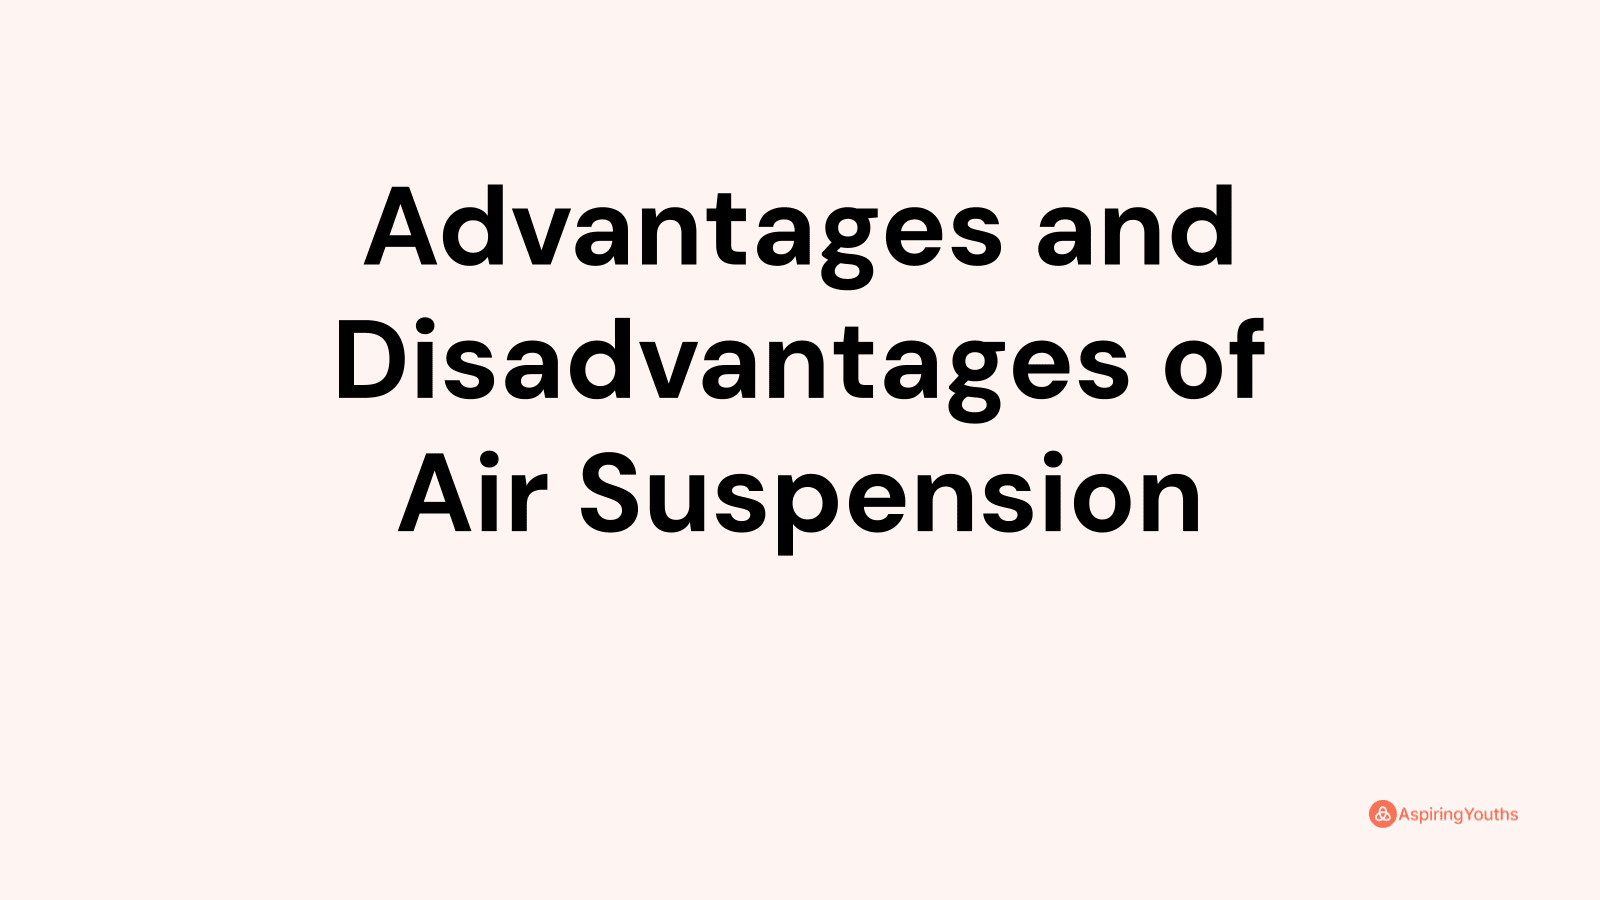 Advantages and disadvantages of Air Suspension